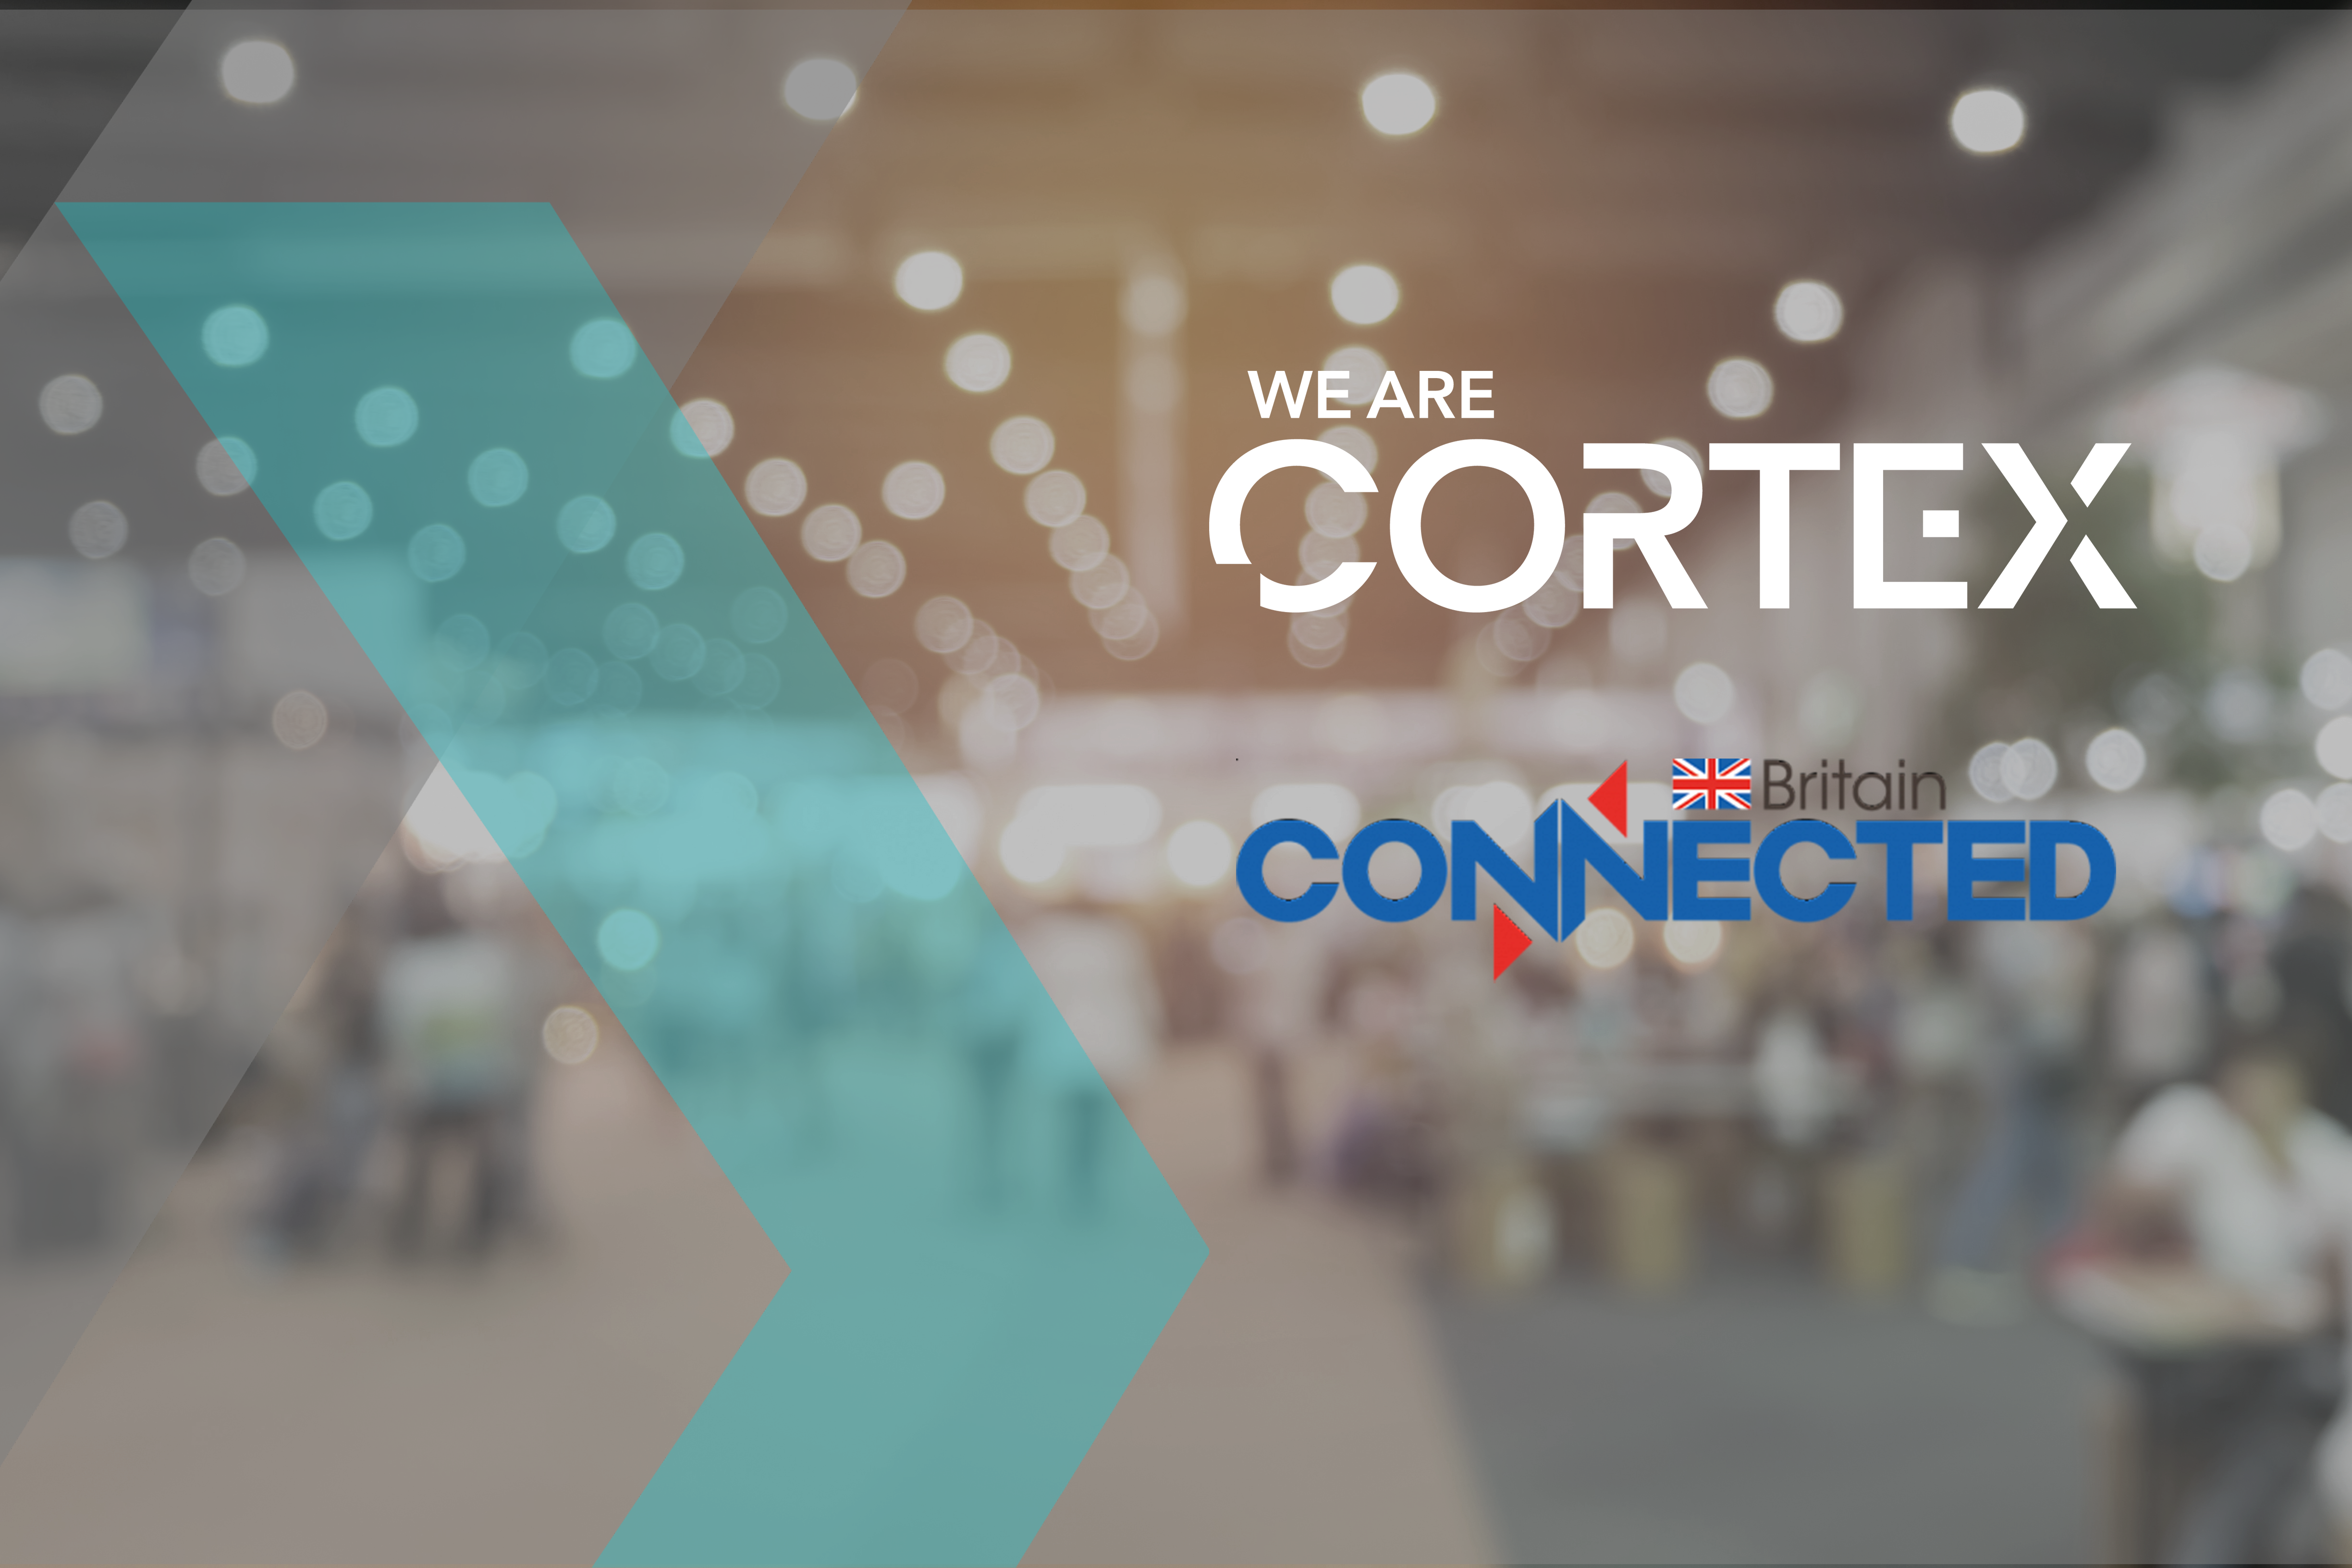 We Are CORTEX at Connected Britain